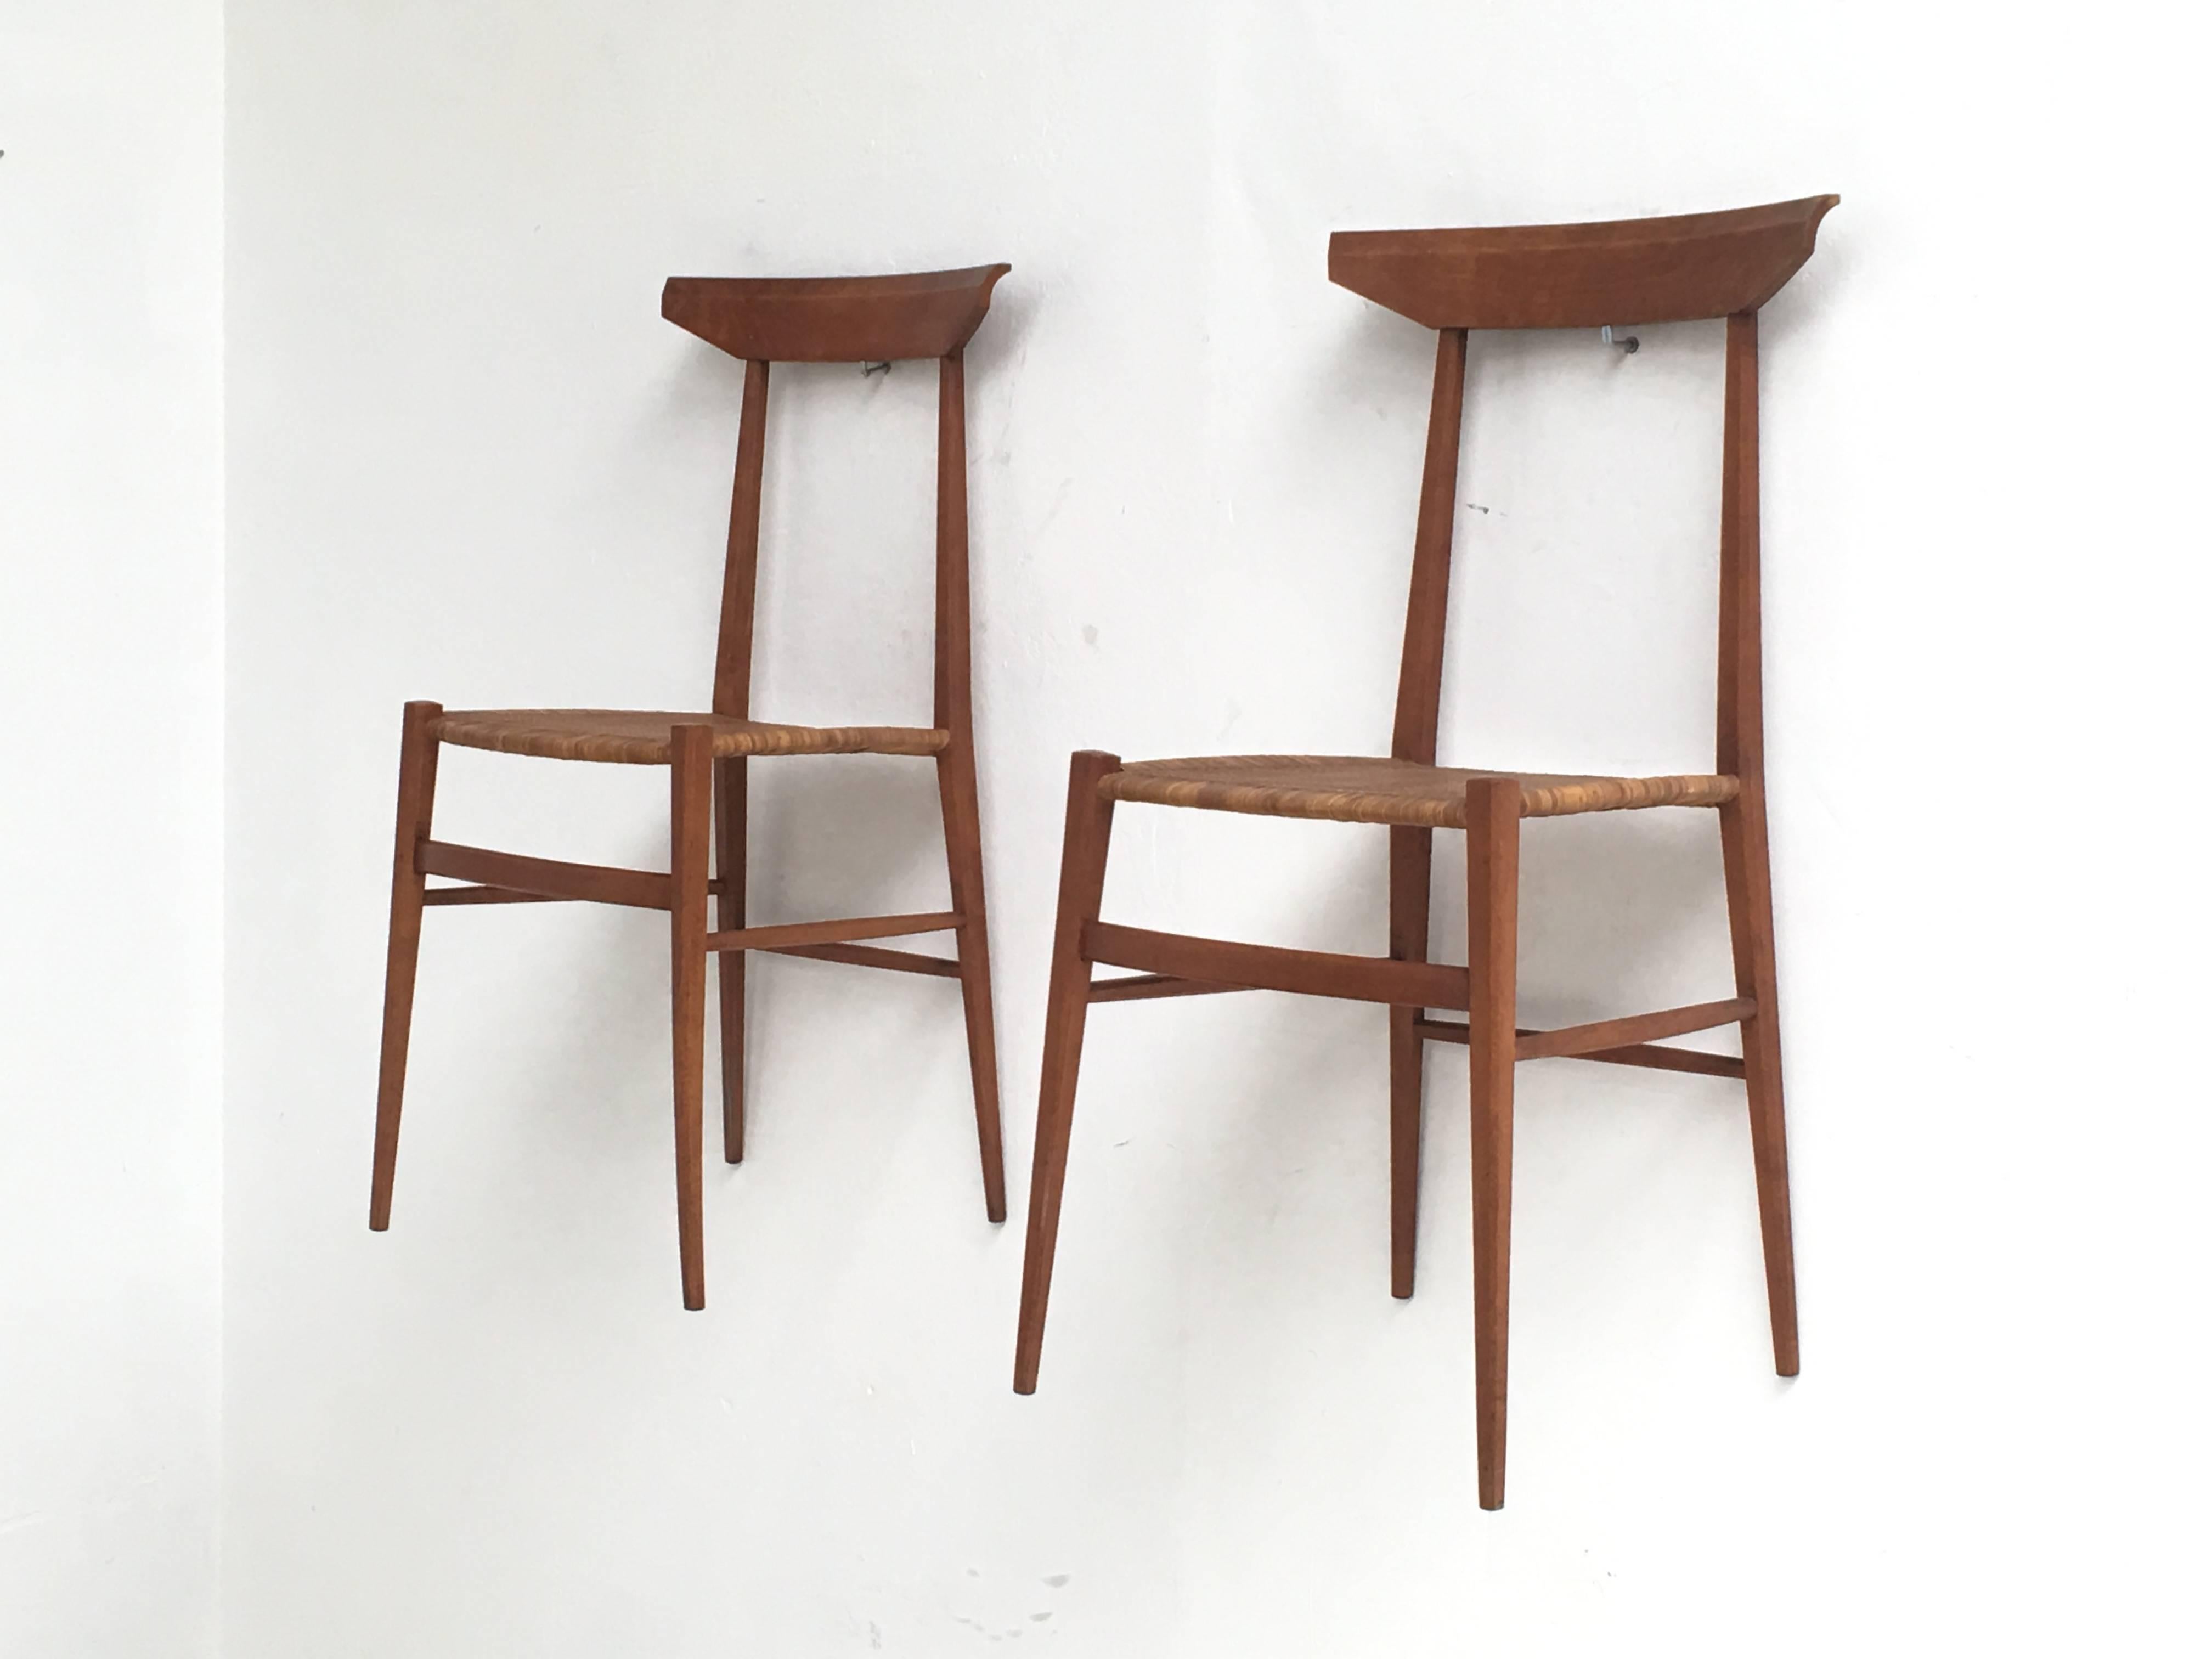 Original and well preserved pair of 1950s Italian Modernist Chiavari side chairs 

Made by the skilled craftsmen of V. Negrello a manufacturer in Chiavari, an Italian town at the beautiful coast (Cinqa Terra) south of Genoa

Most of the Chiavari